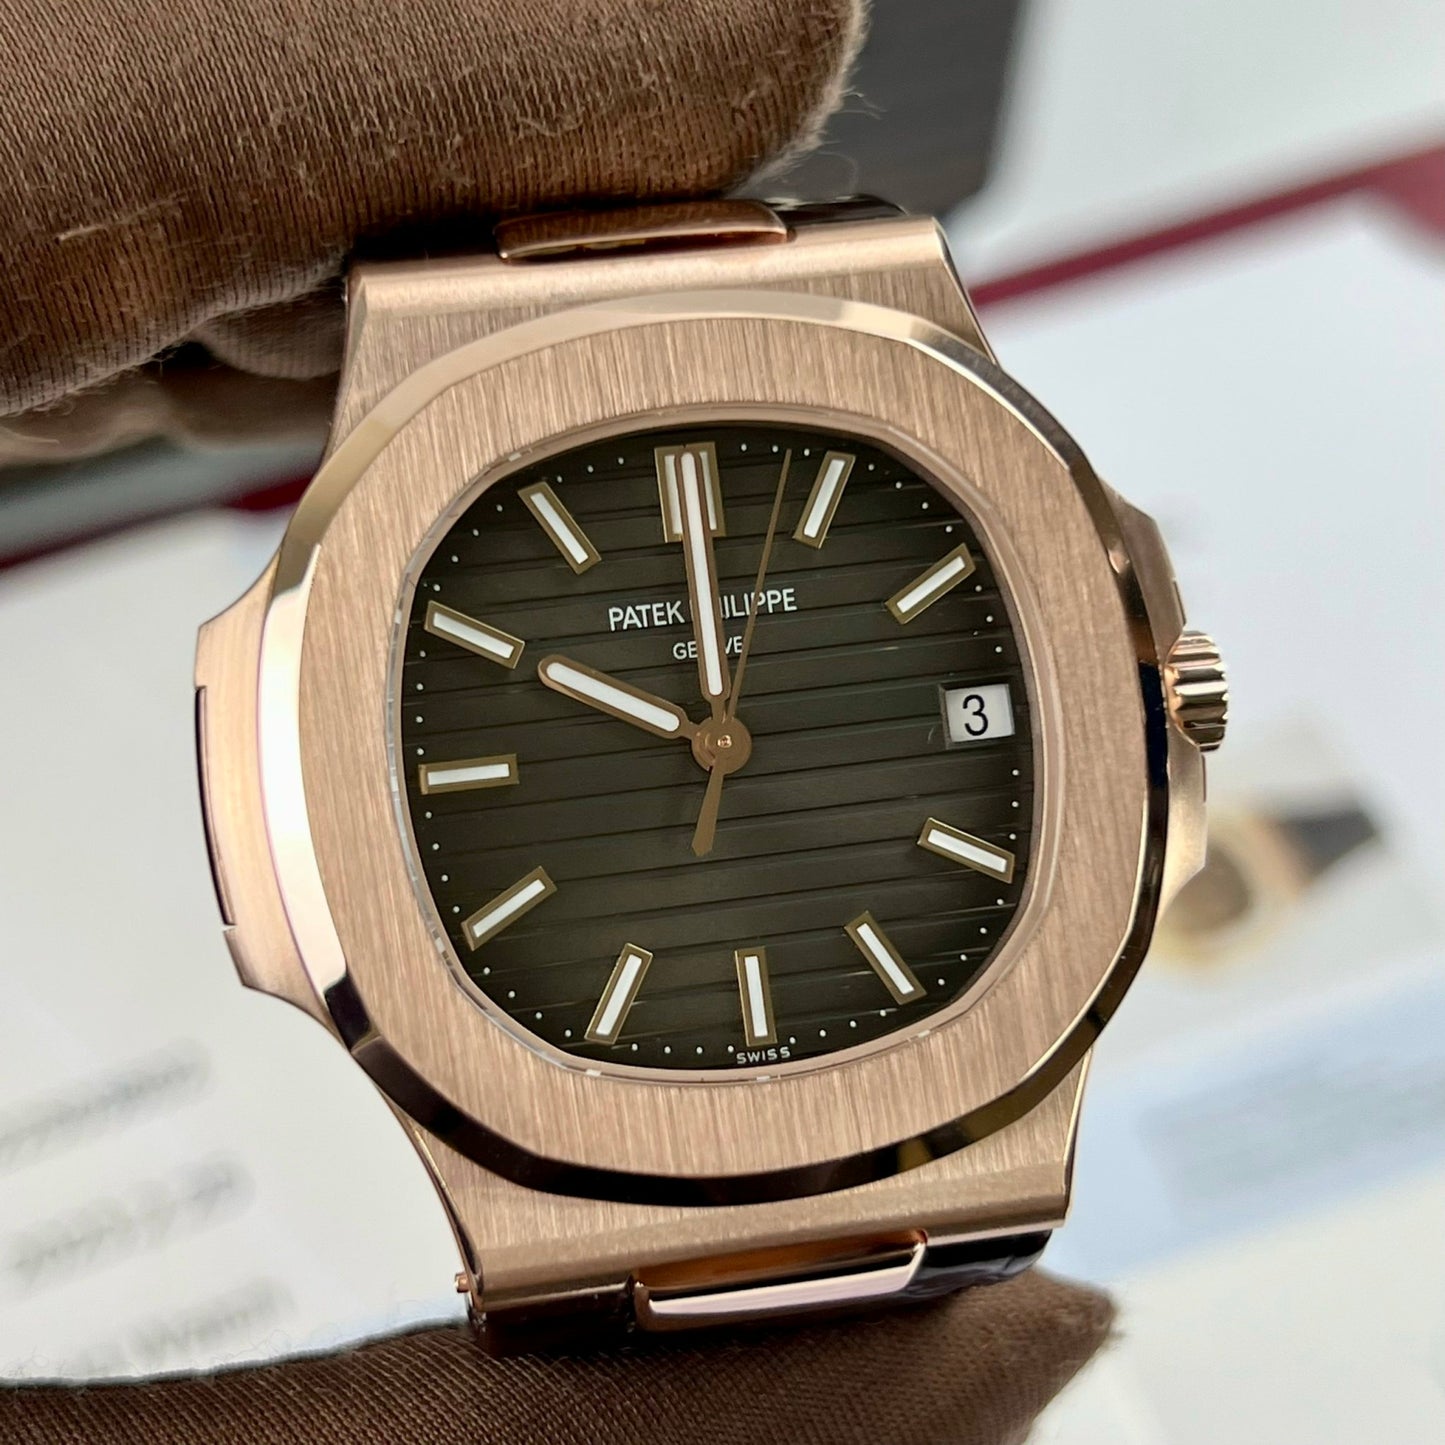 Patek Philippe Nautilus 5711/1R-001 –Wrapped 18k rose gold Leather band version